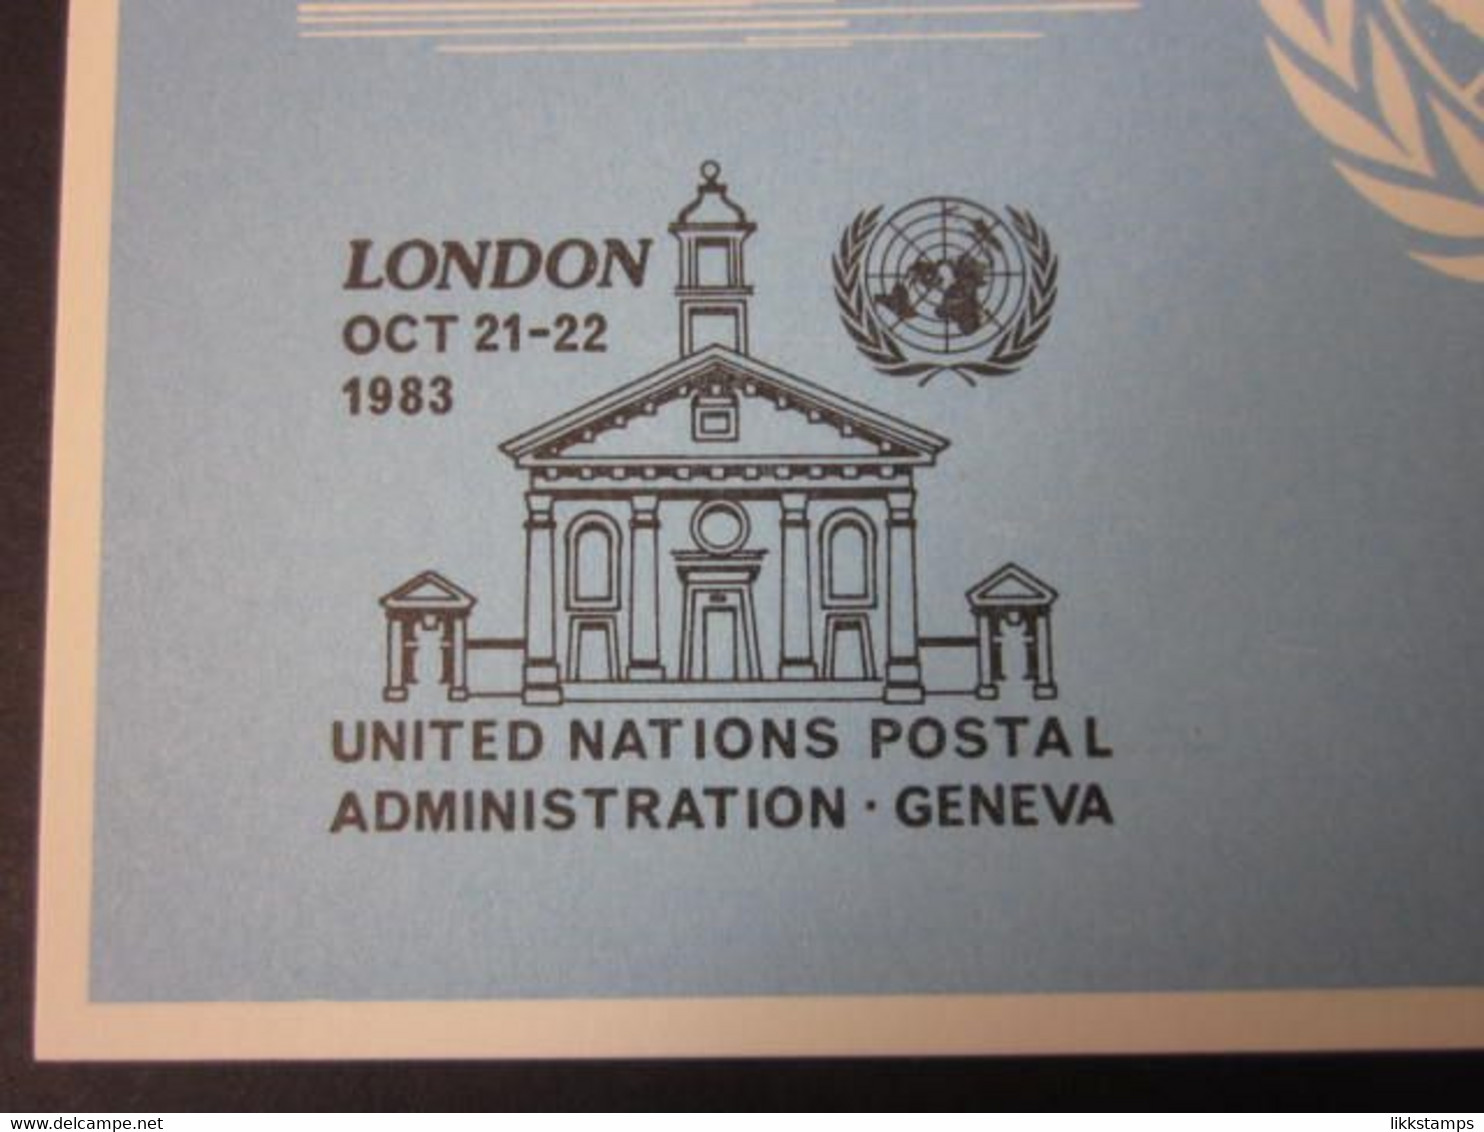 A RARE LONDON 1983 EXHIBITION SOUVENIR CARD WITH FIRST DAY OF EVENT CANCELLATION. ( 02285 ) - Covers & Documents